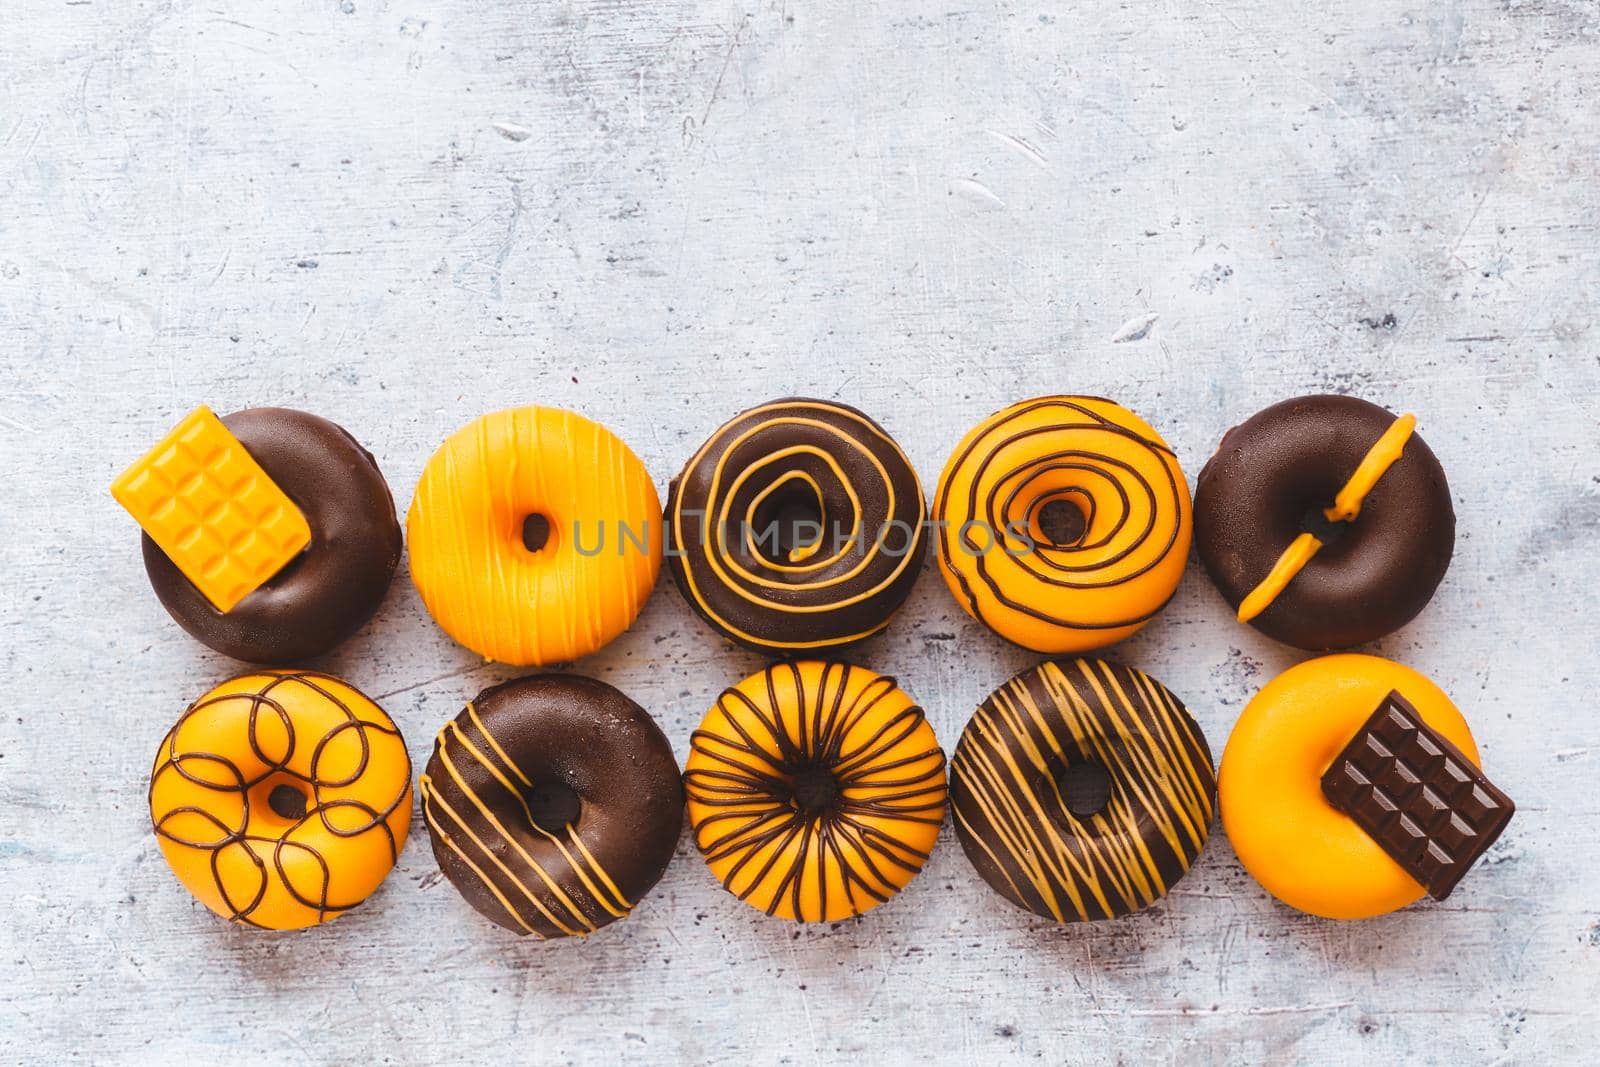 Homemade Orange  And Yellow Glazed Chocolate Donuts  On Rustic Gray Background. Top view, blank space by Slast20